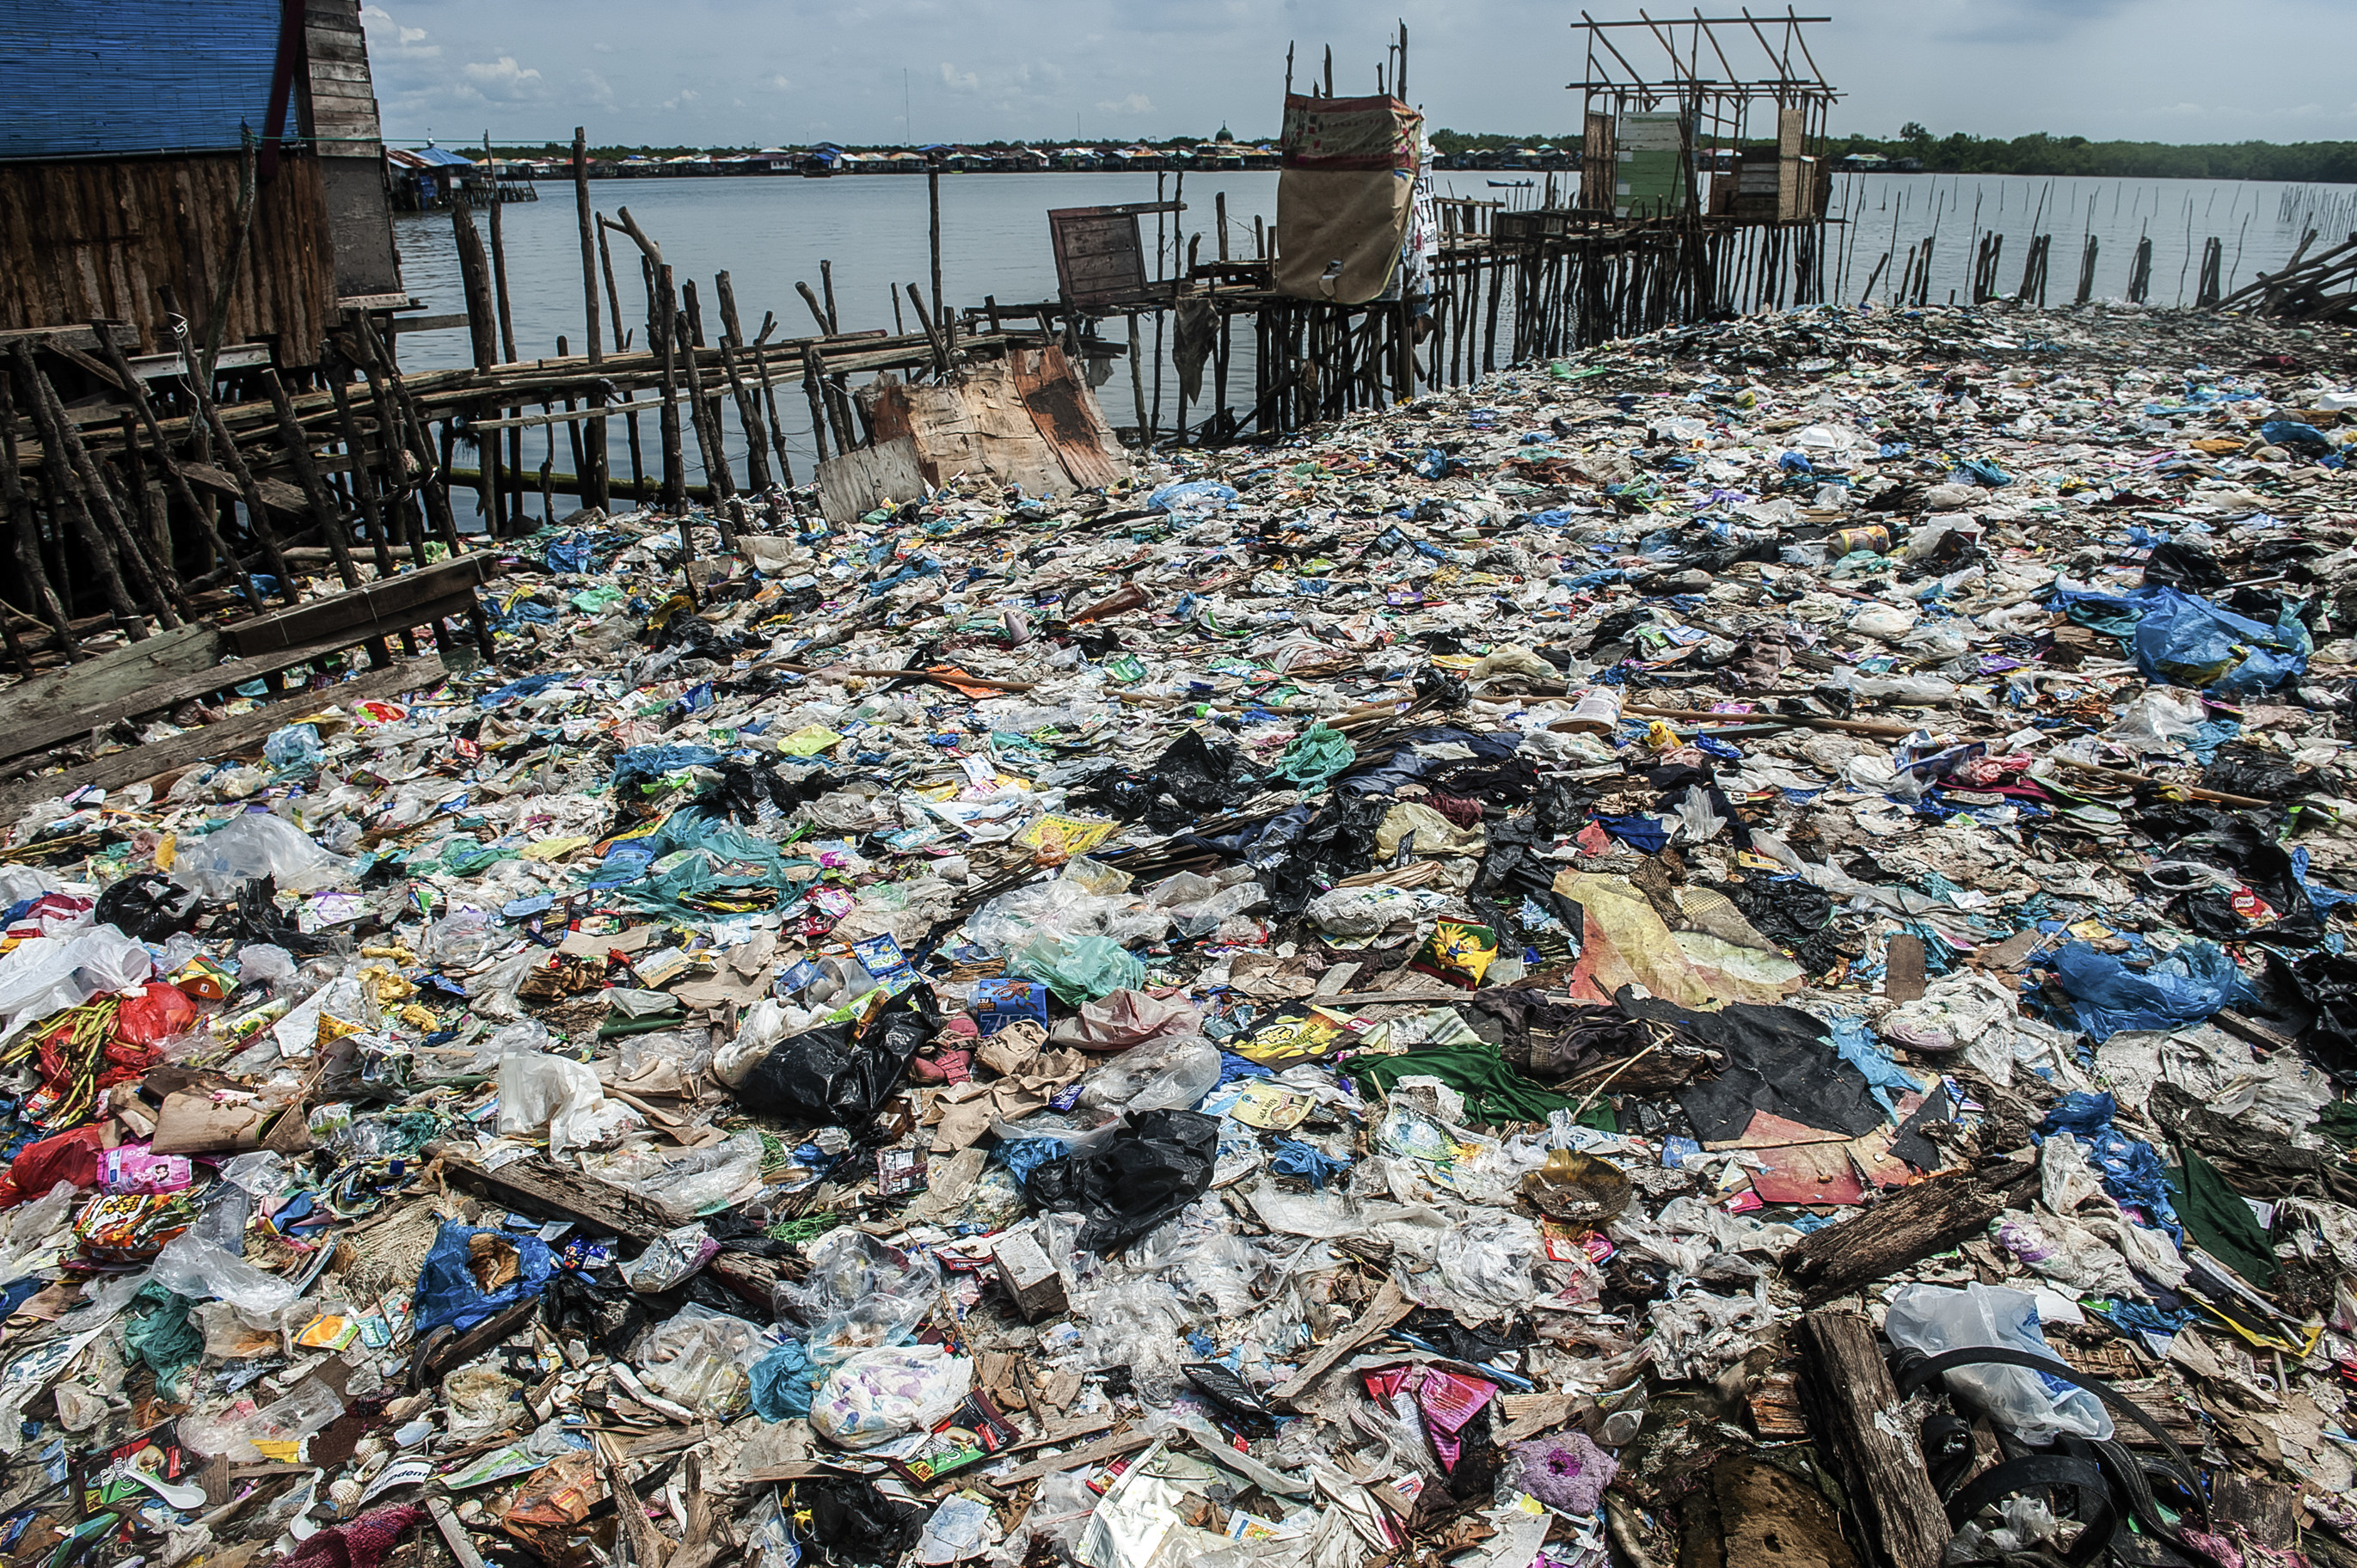 Plastic may be a dirty word these days, but its origins are in art and sculpture. Photo: Sutanta Aditya/NurPhoto via Getty Images